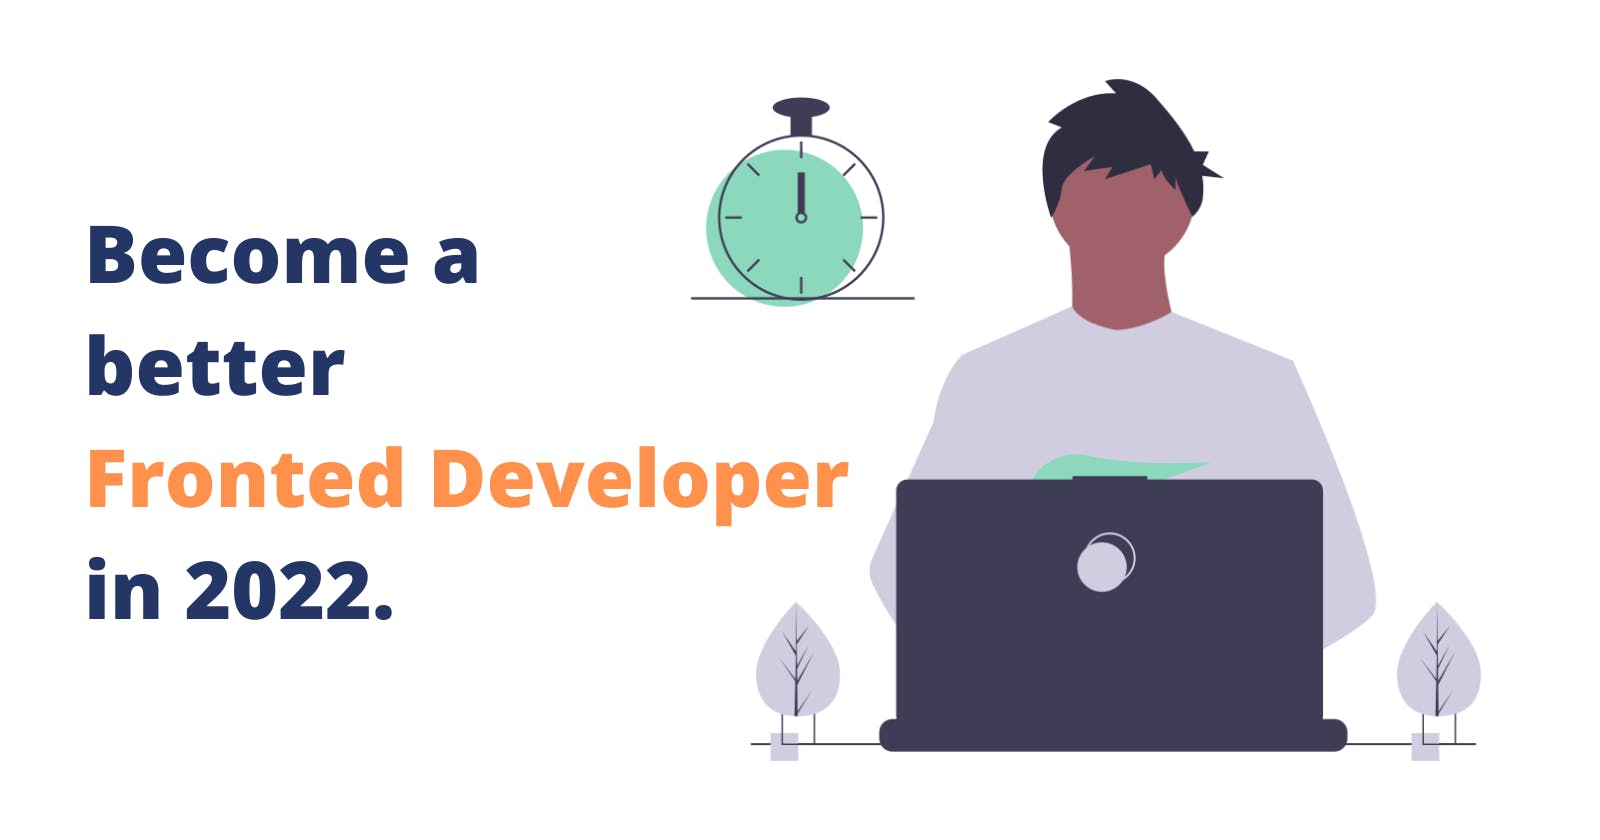 Become a better Fronted Developer in 2022! 🎆